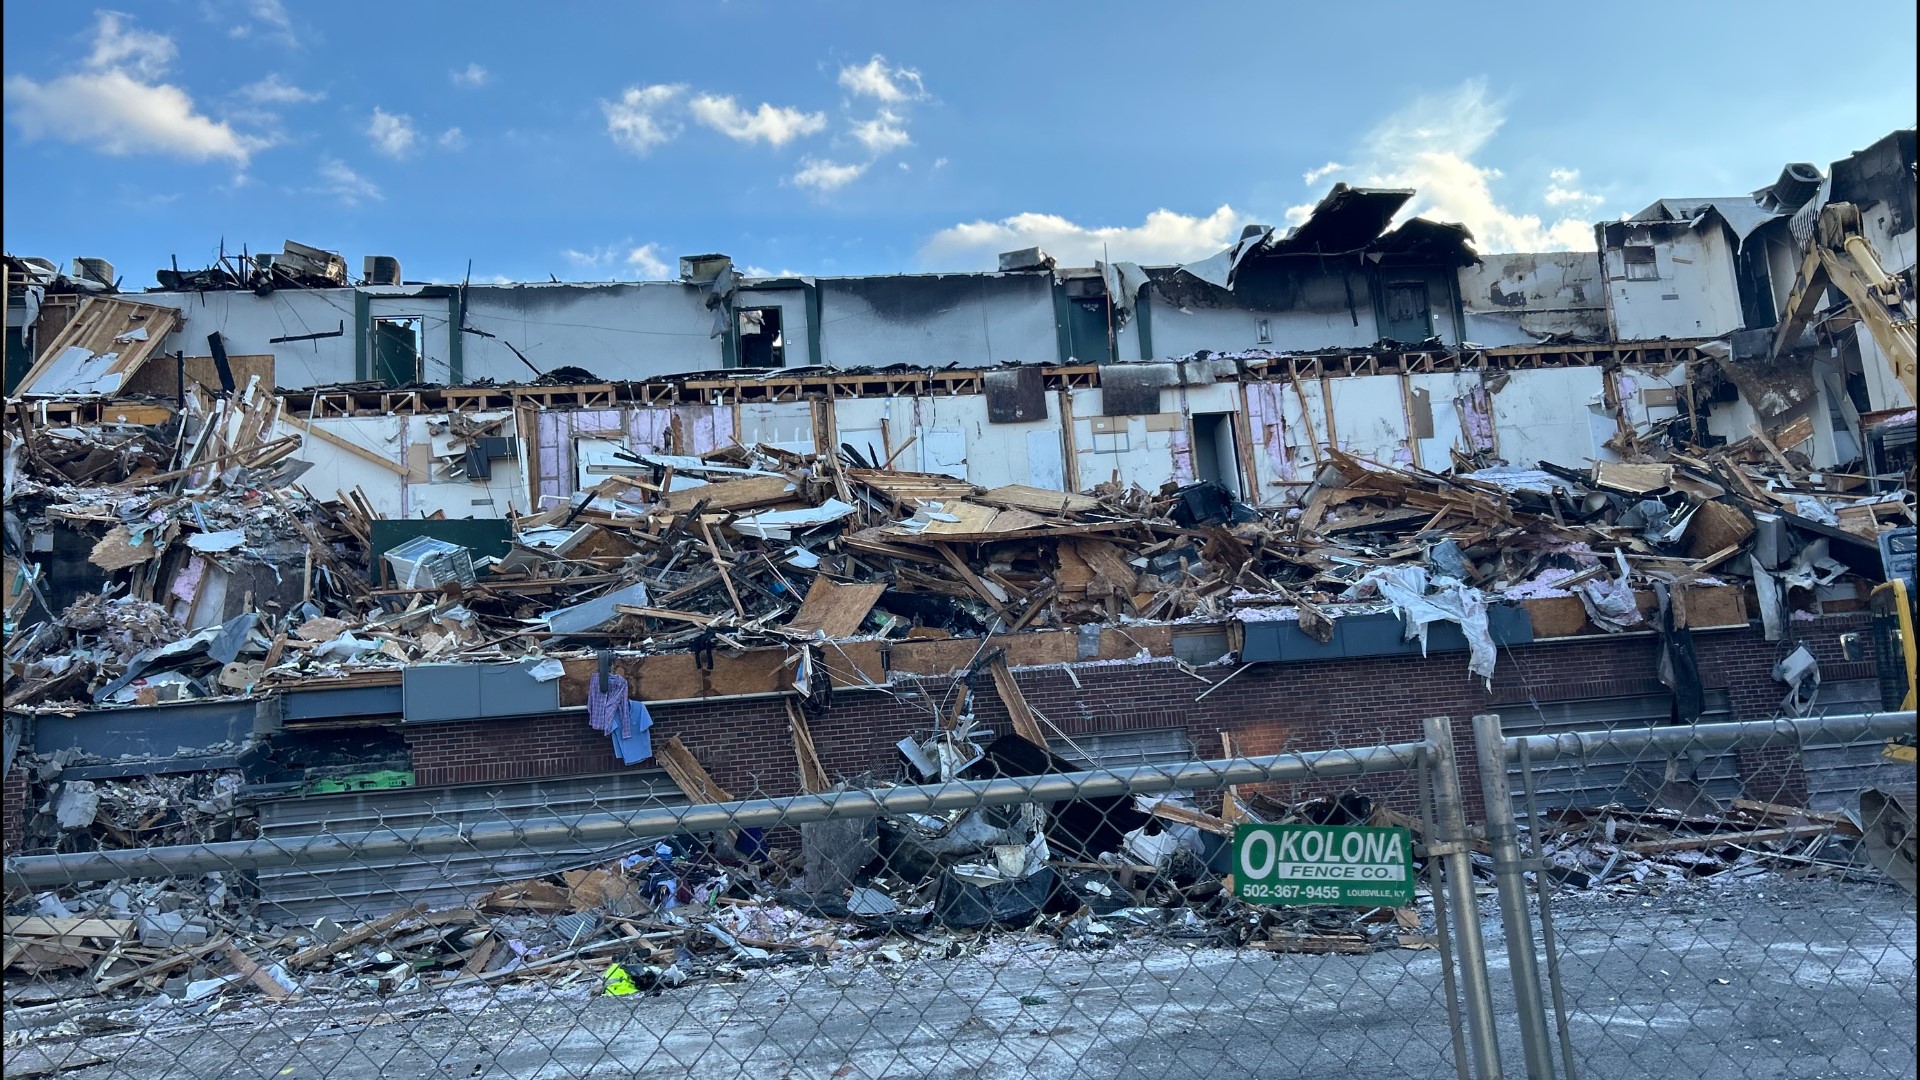 A massive fire caused the building's interior to collapse earlier this week. All 64 residents were displaced.